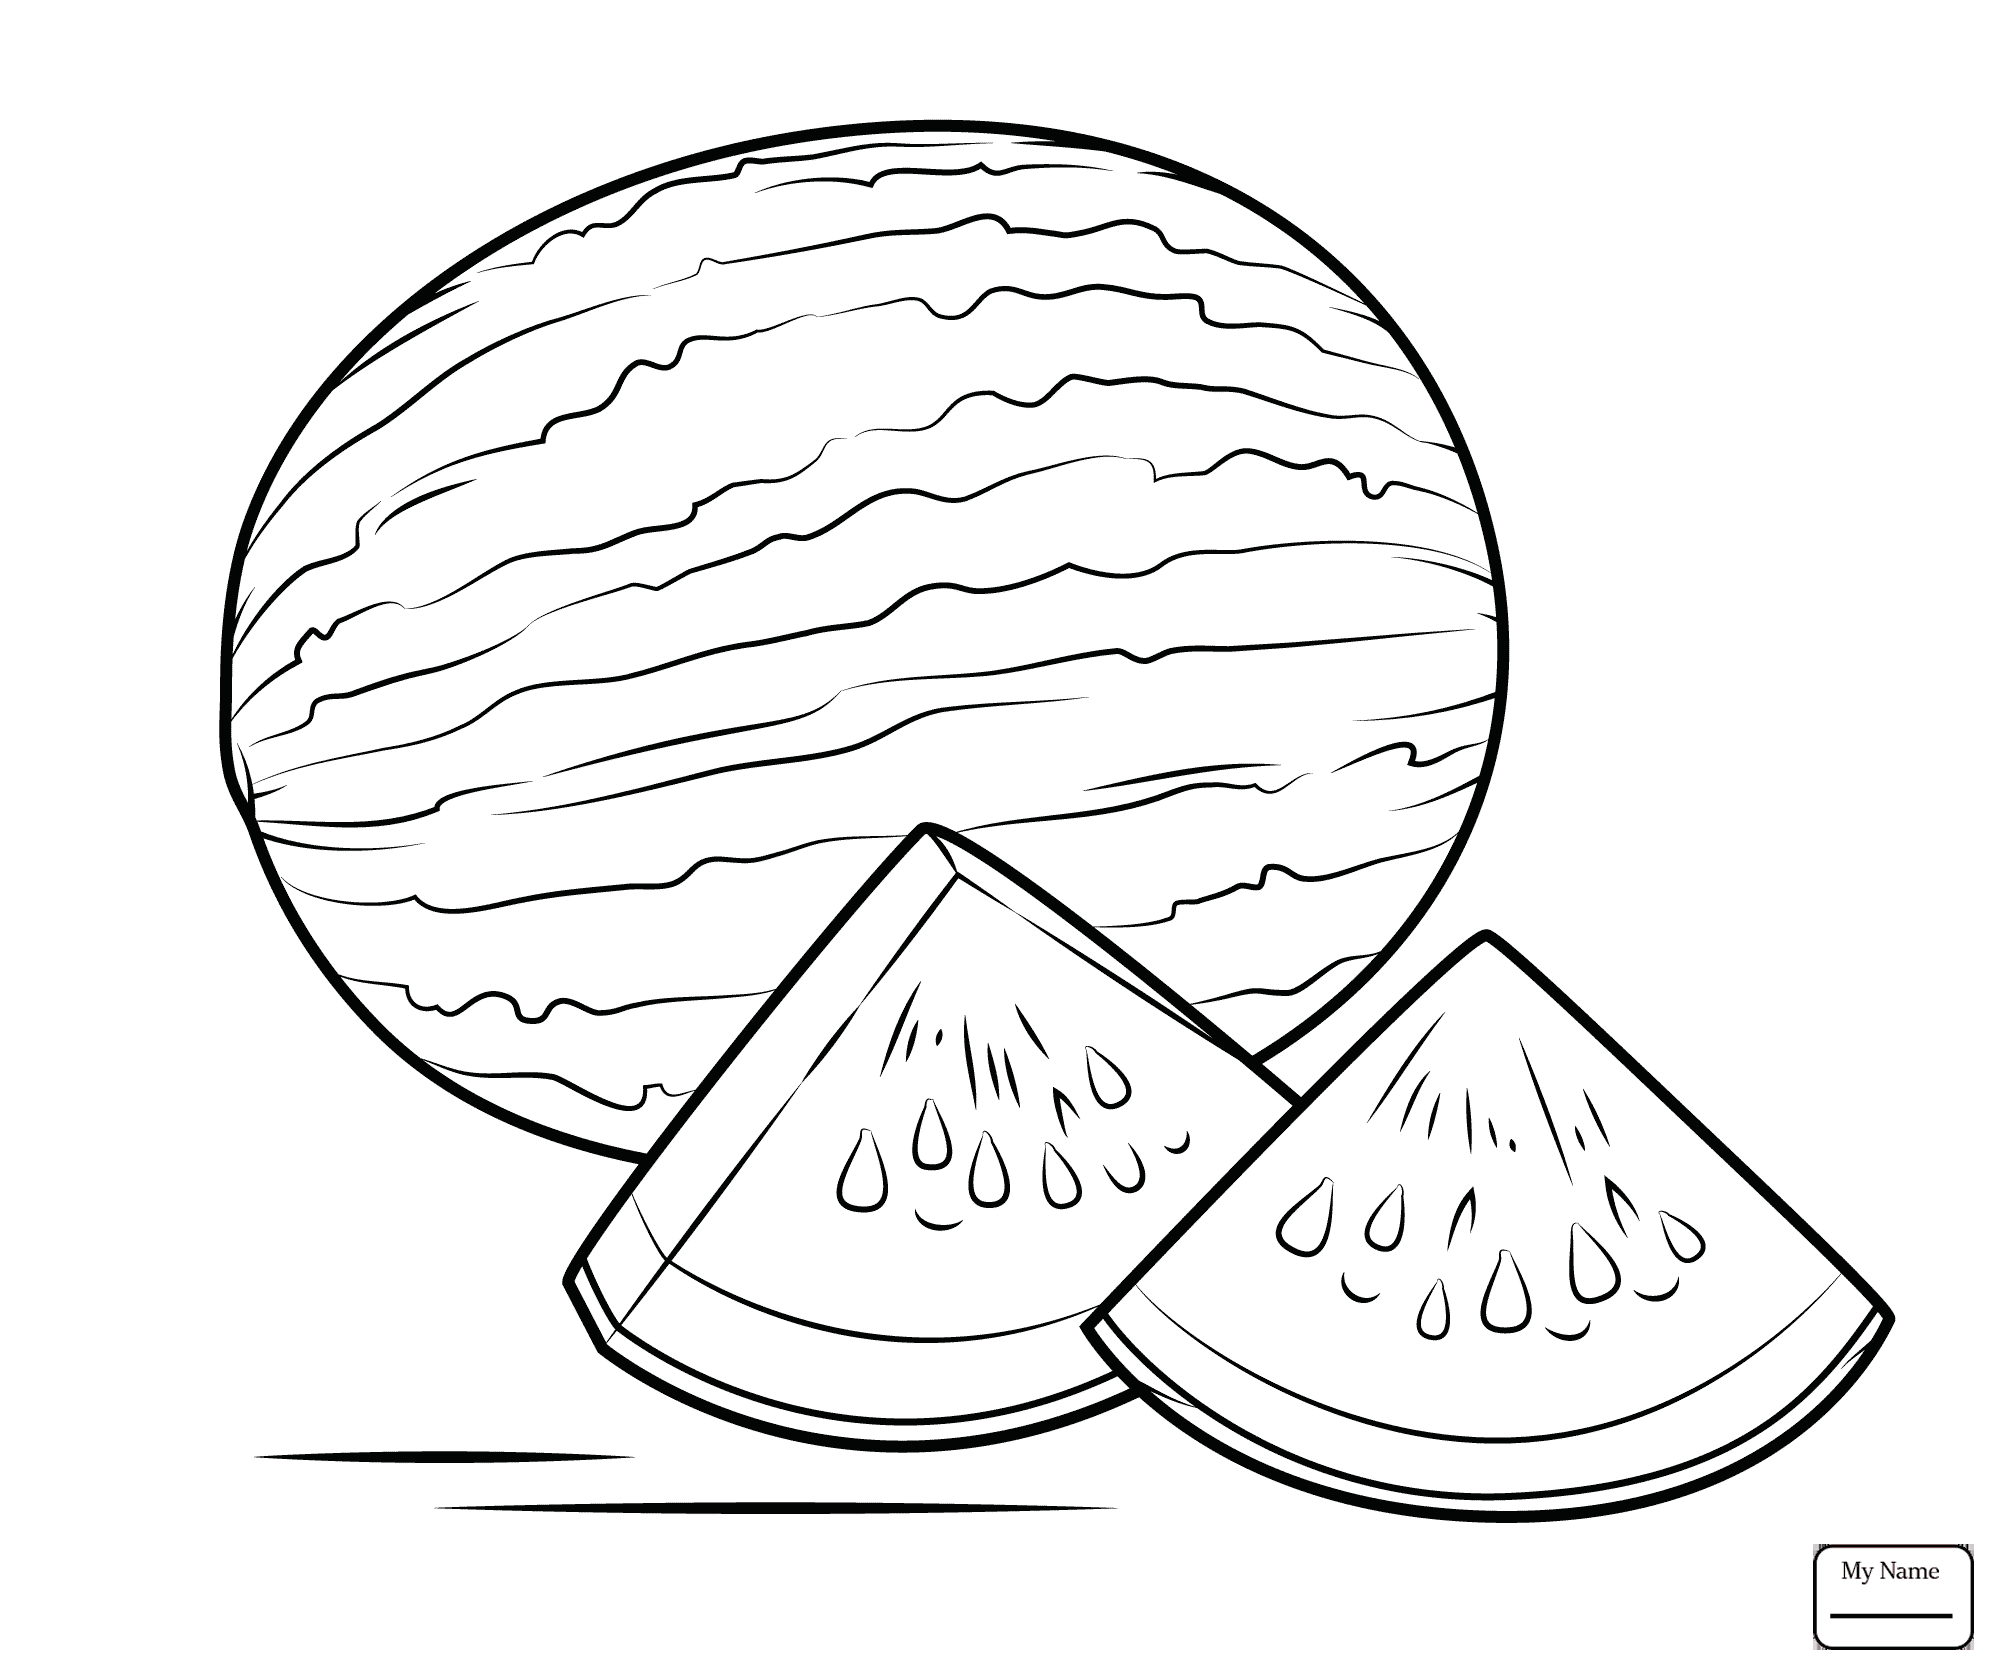 Download Watermelon Slice Drawing at GetDrawings.com | Free for ...